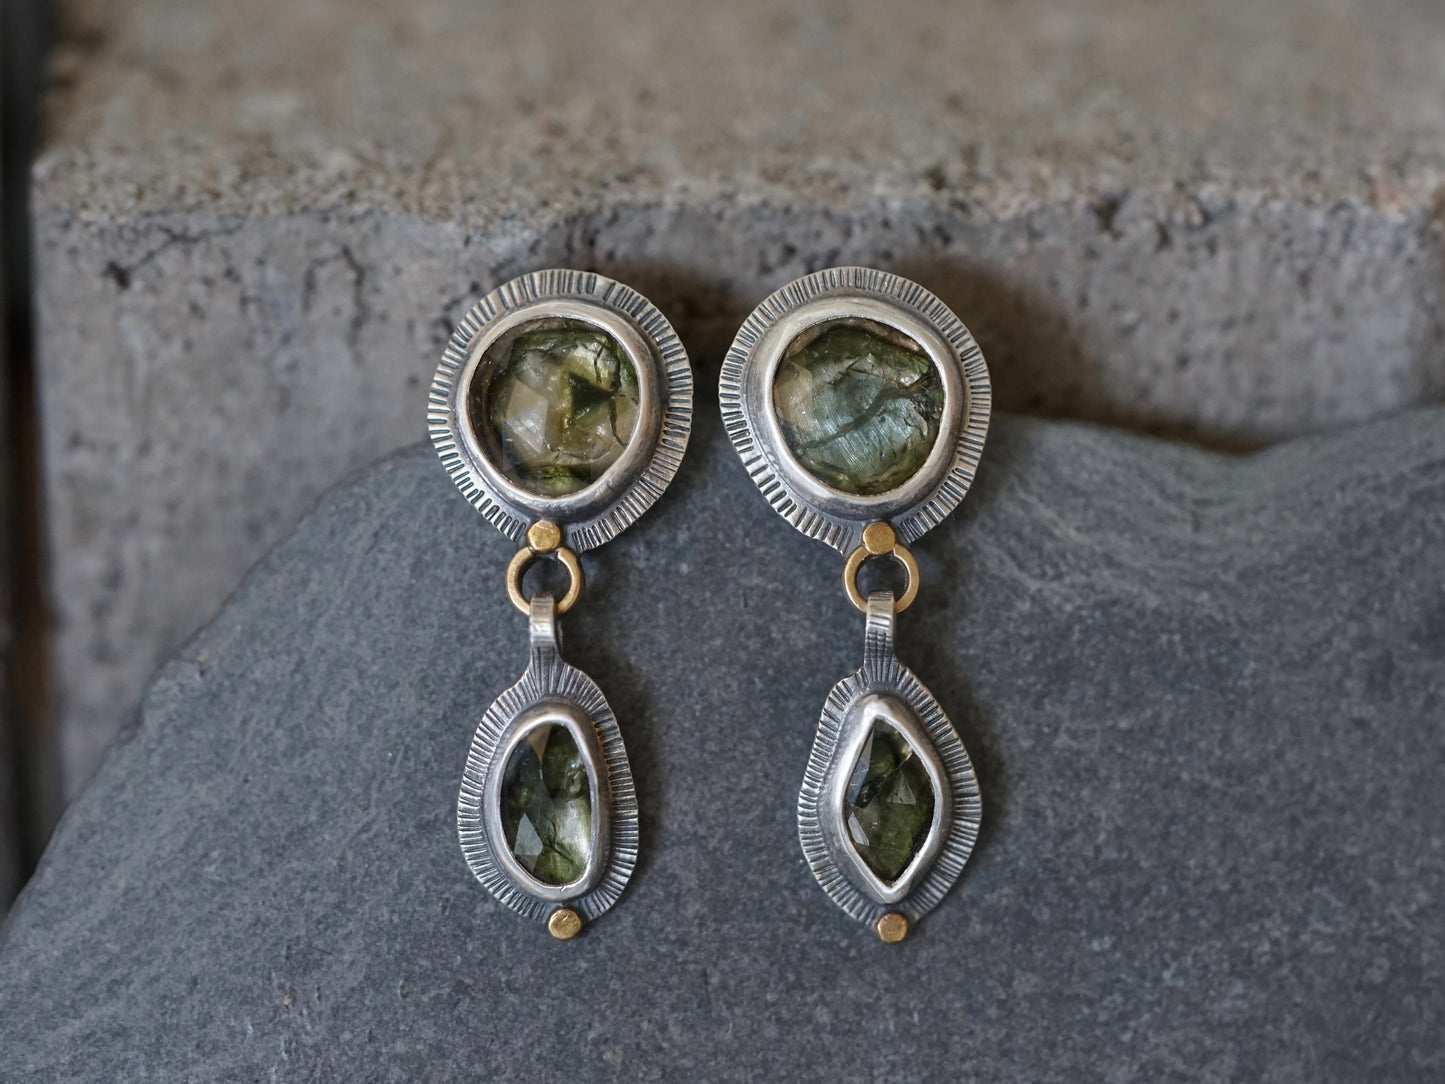 Green tourmaline earrings with 22k gold accents